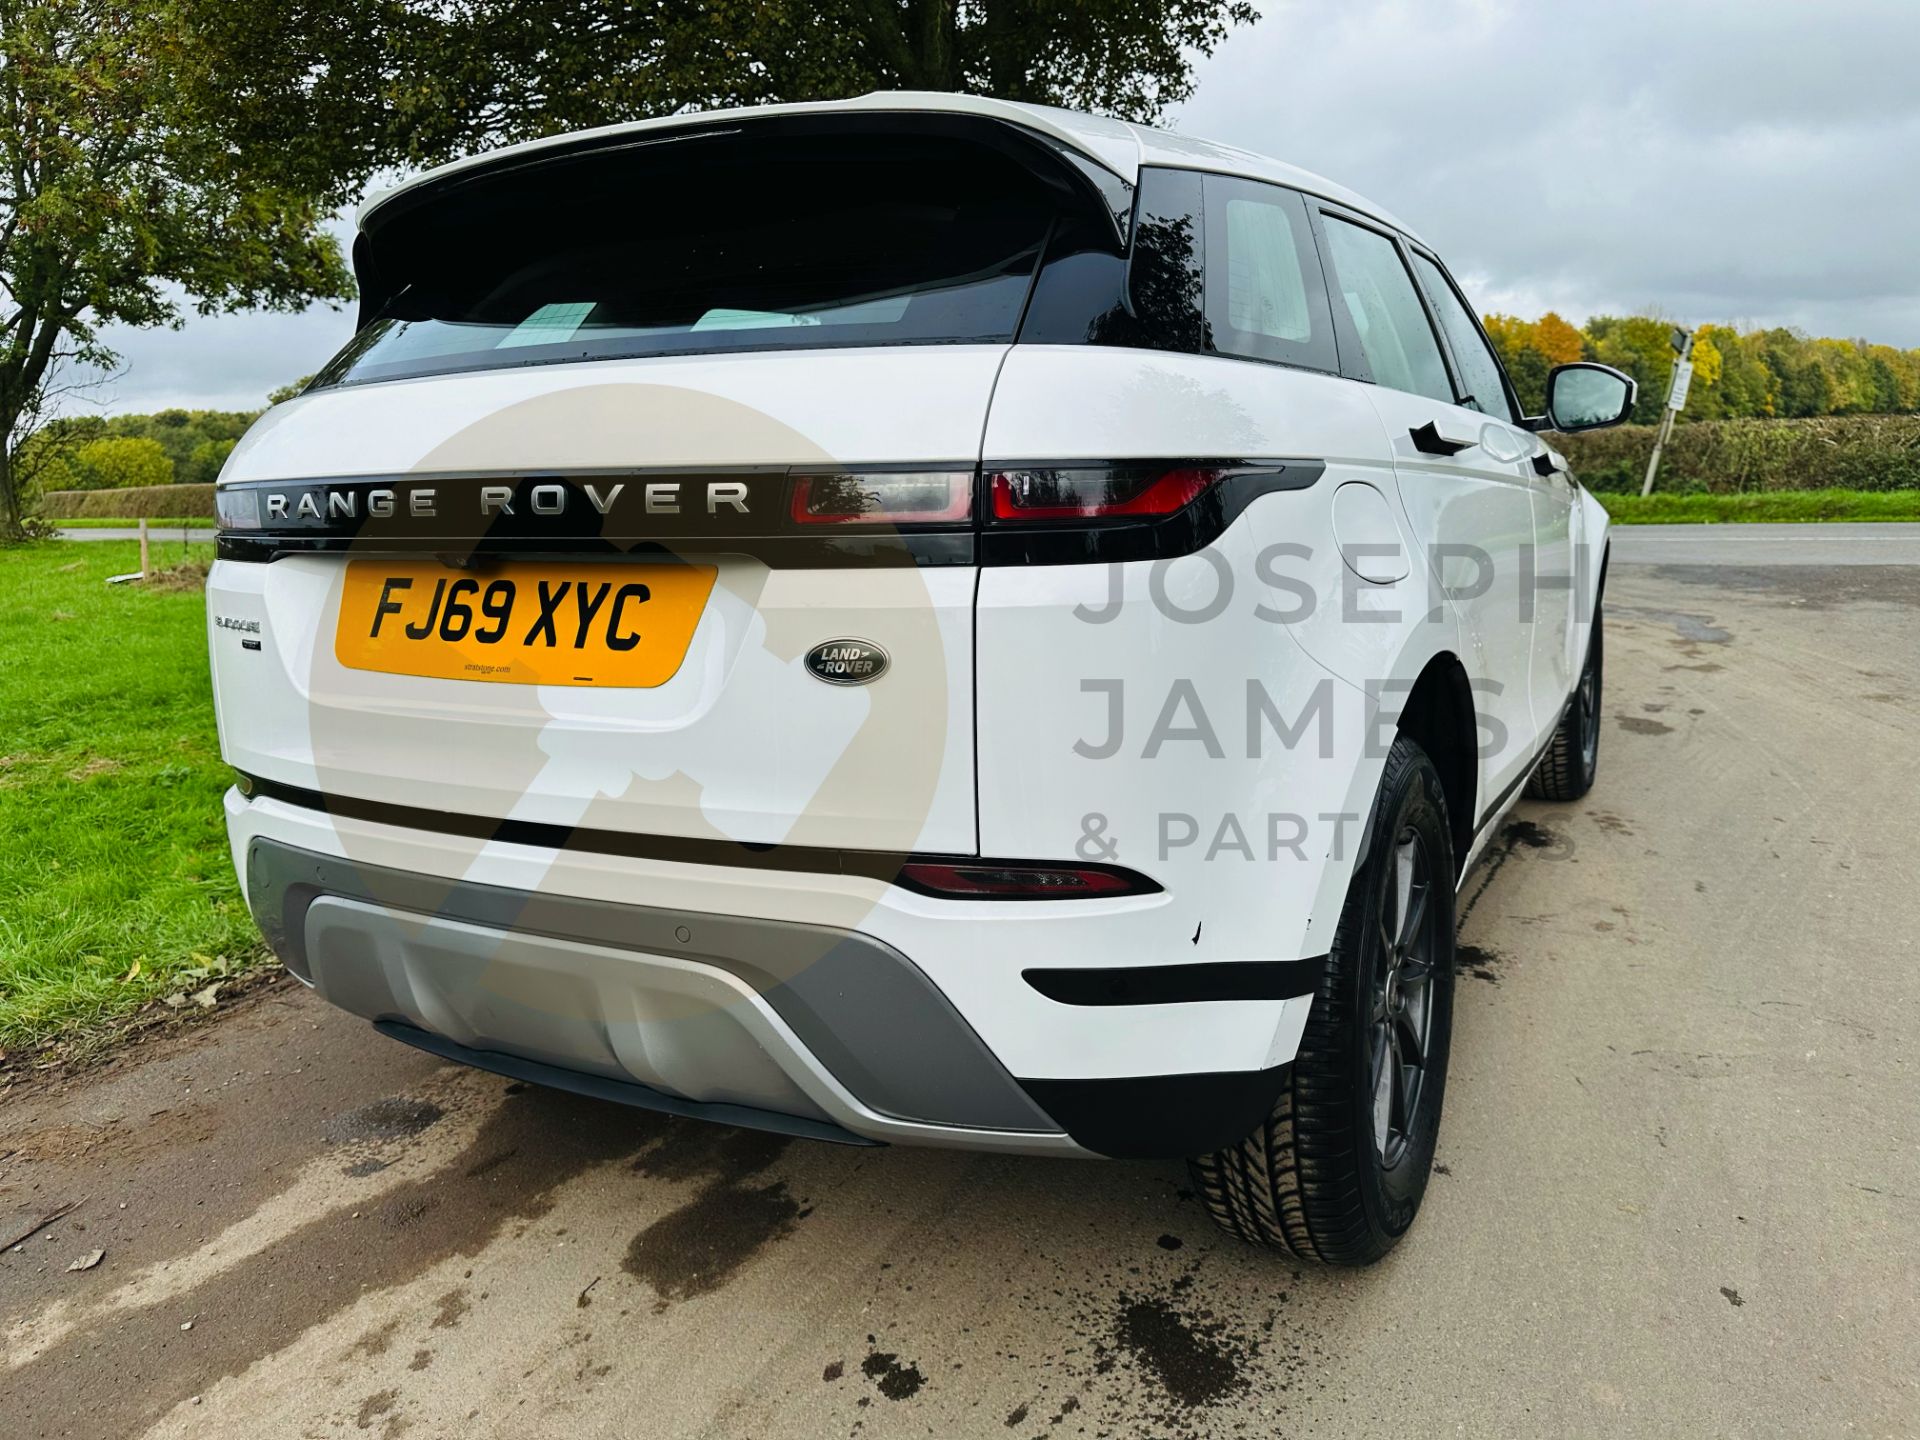 (ON SALE) LAND ROVER RANGE ROVER EVOQUE 2.0d AUTO-START STOP (2020 MODEL) ONLY 33K MILES FROM NEW - Image 13 of 41